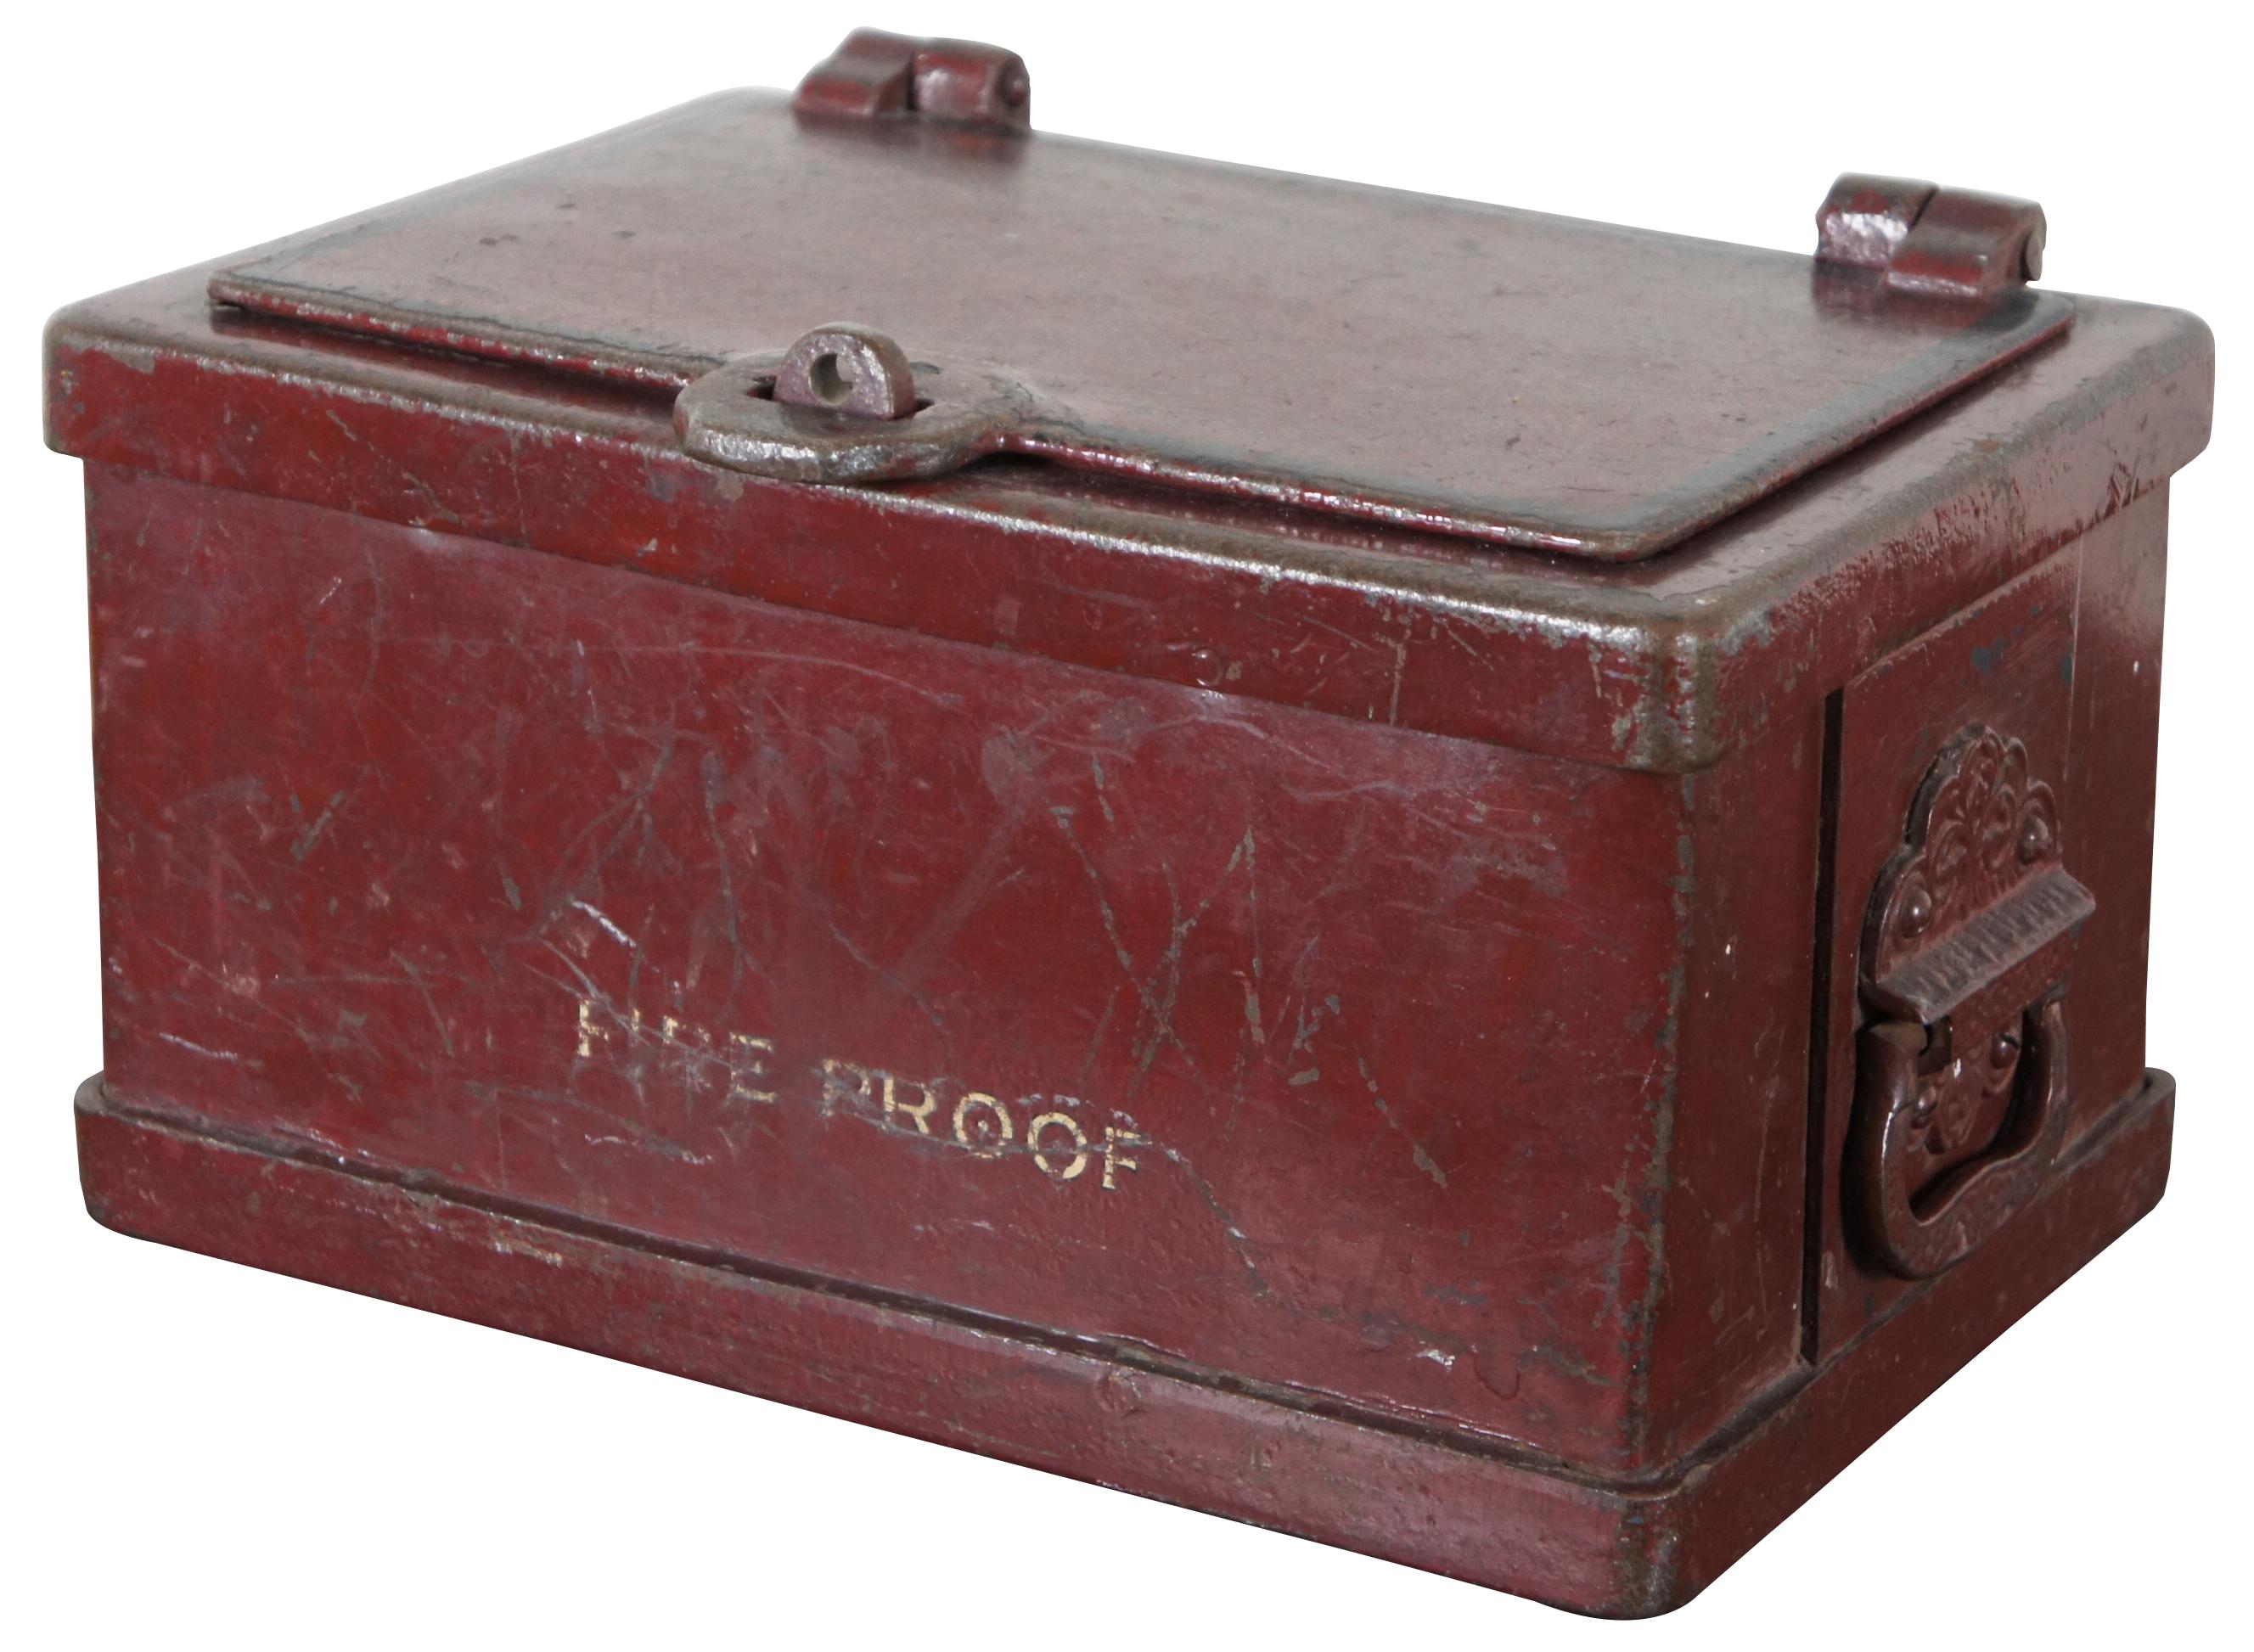 Rare antique 19th century Wells Fargo heavy iron stagecoach strong box, painted red and marked “Fire Proof” with loop on the lid for locking with a padlock.
 